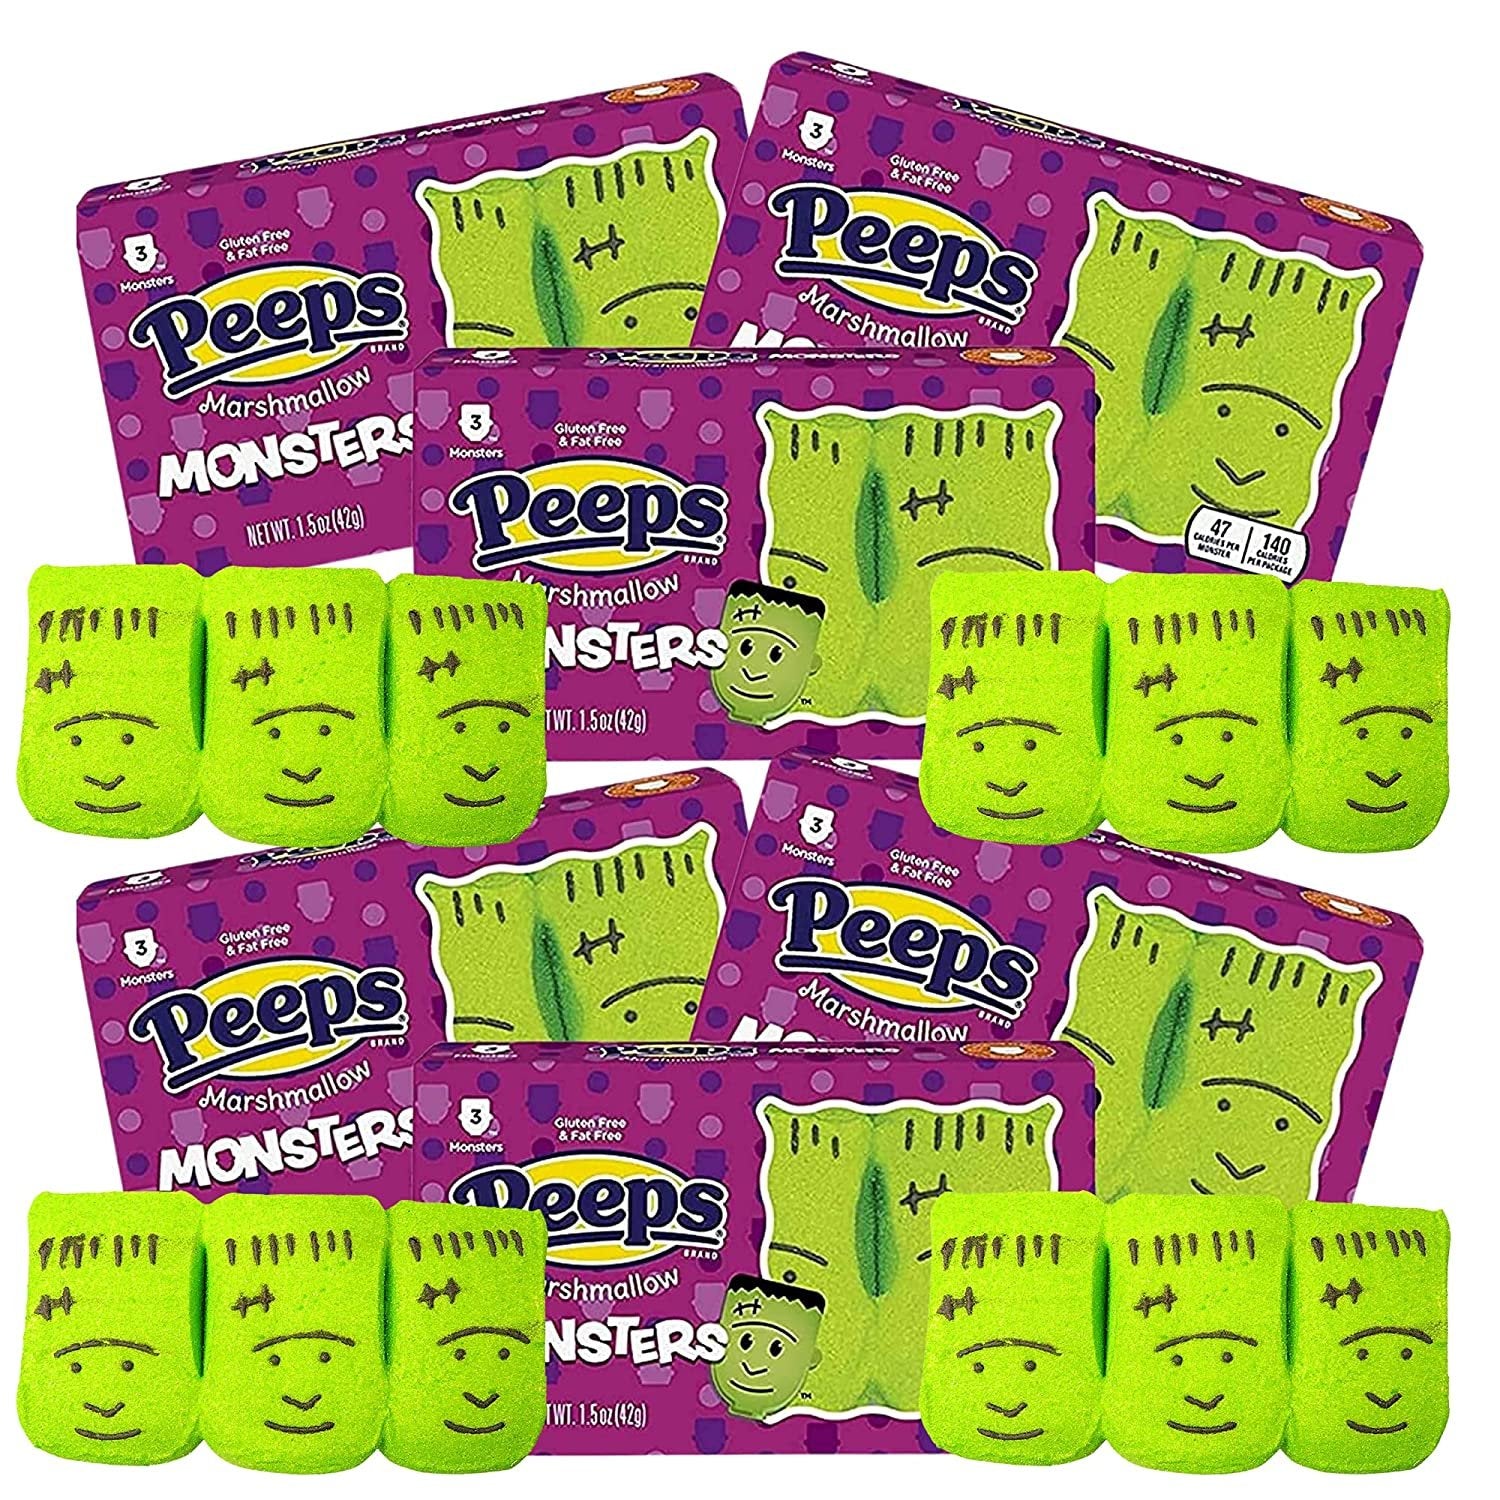 Halloween Candy Exclusive! Peeps Marshmallow Monsters! Delicious, Soft, And Chewy! (2 Pack)